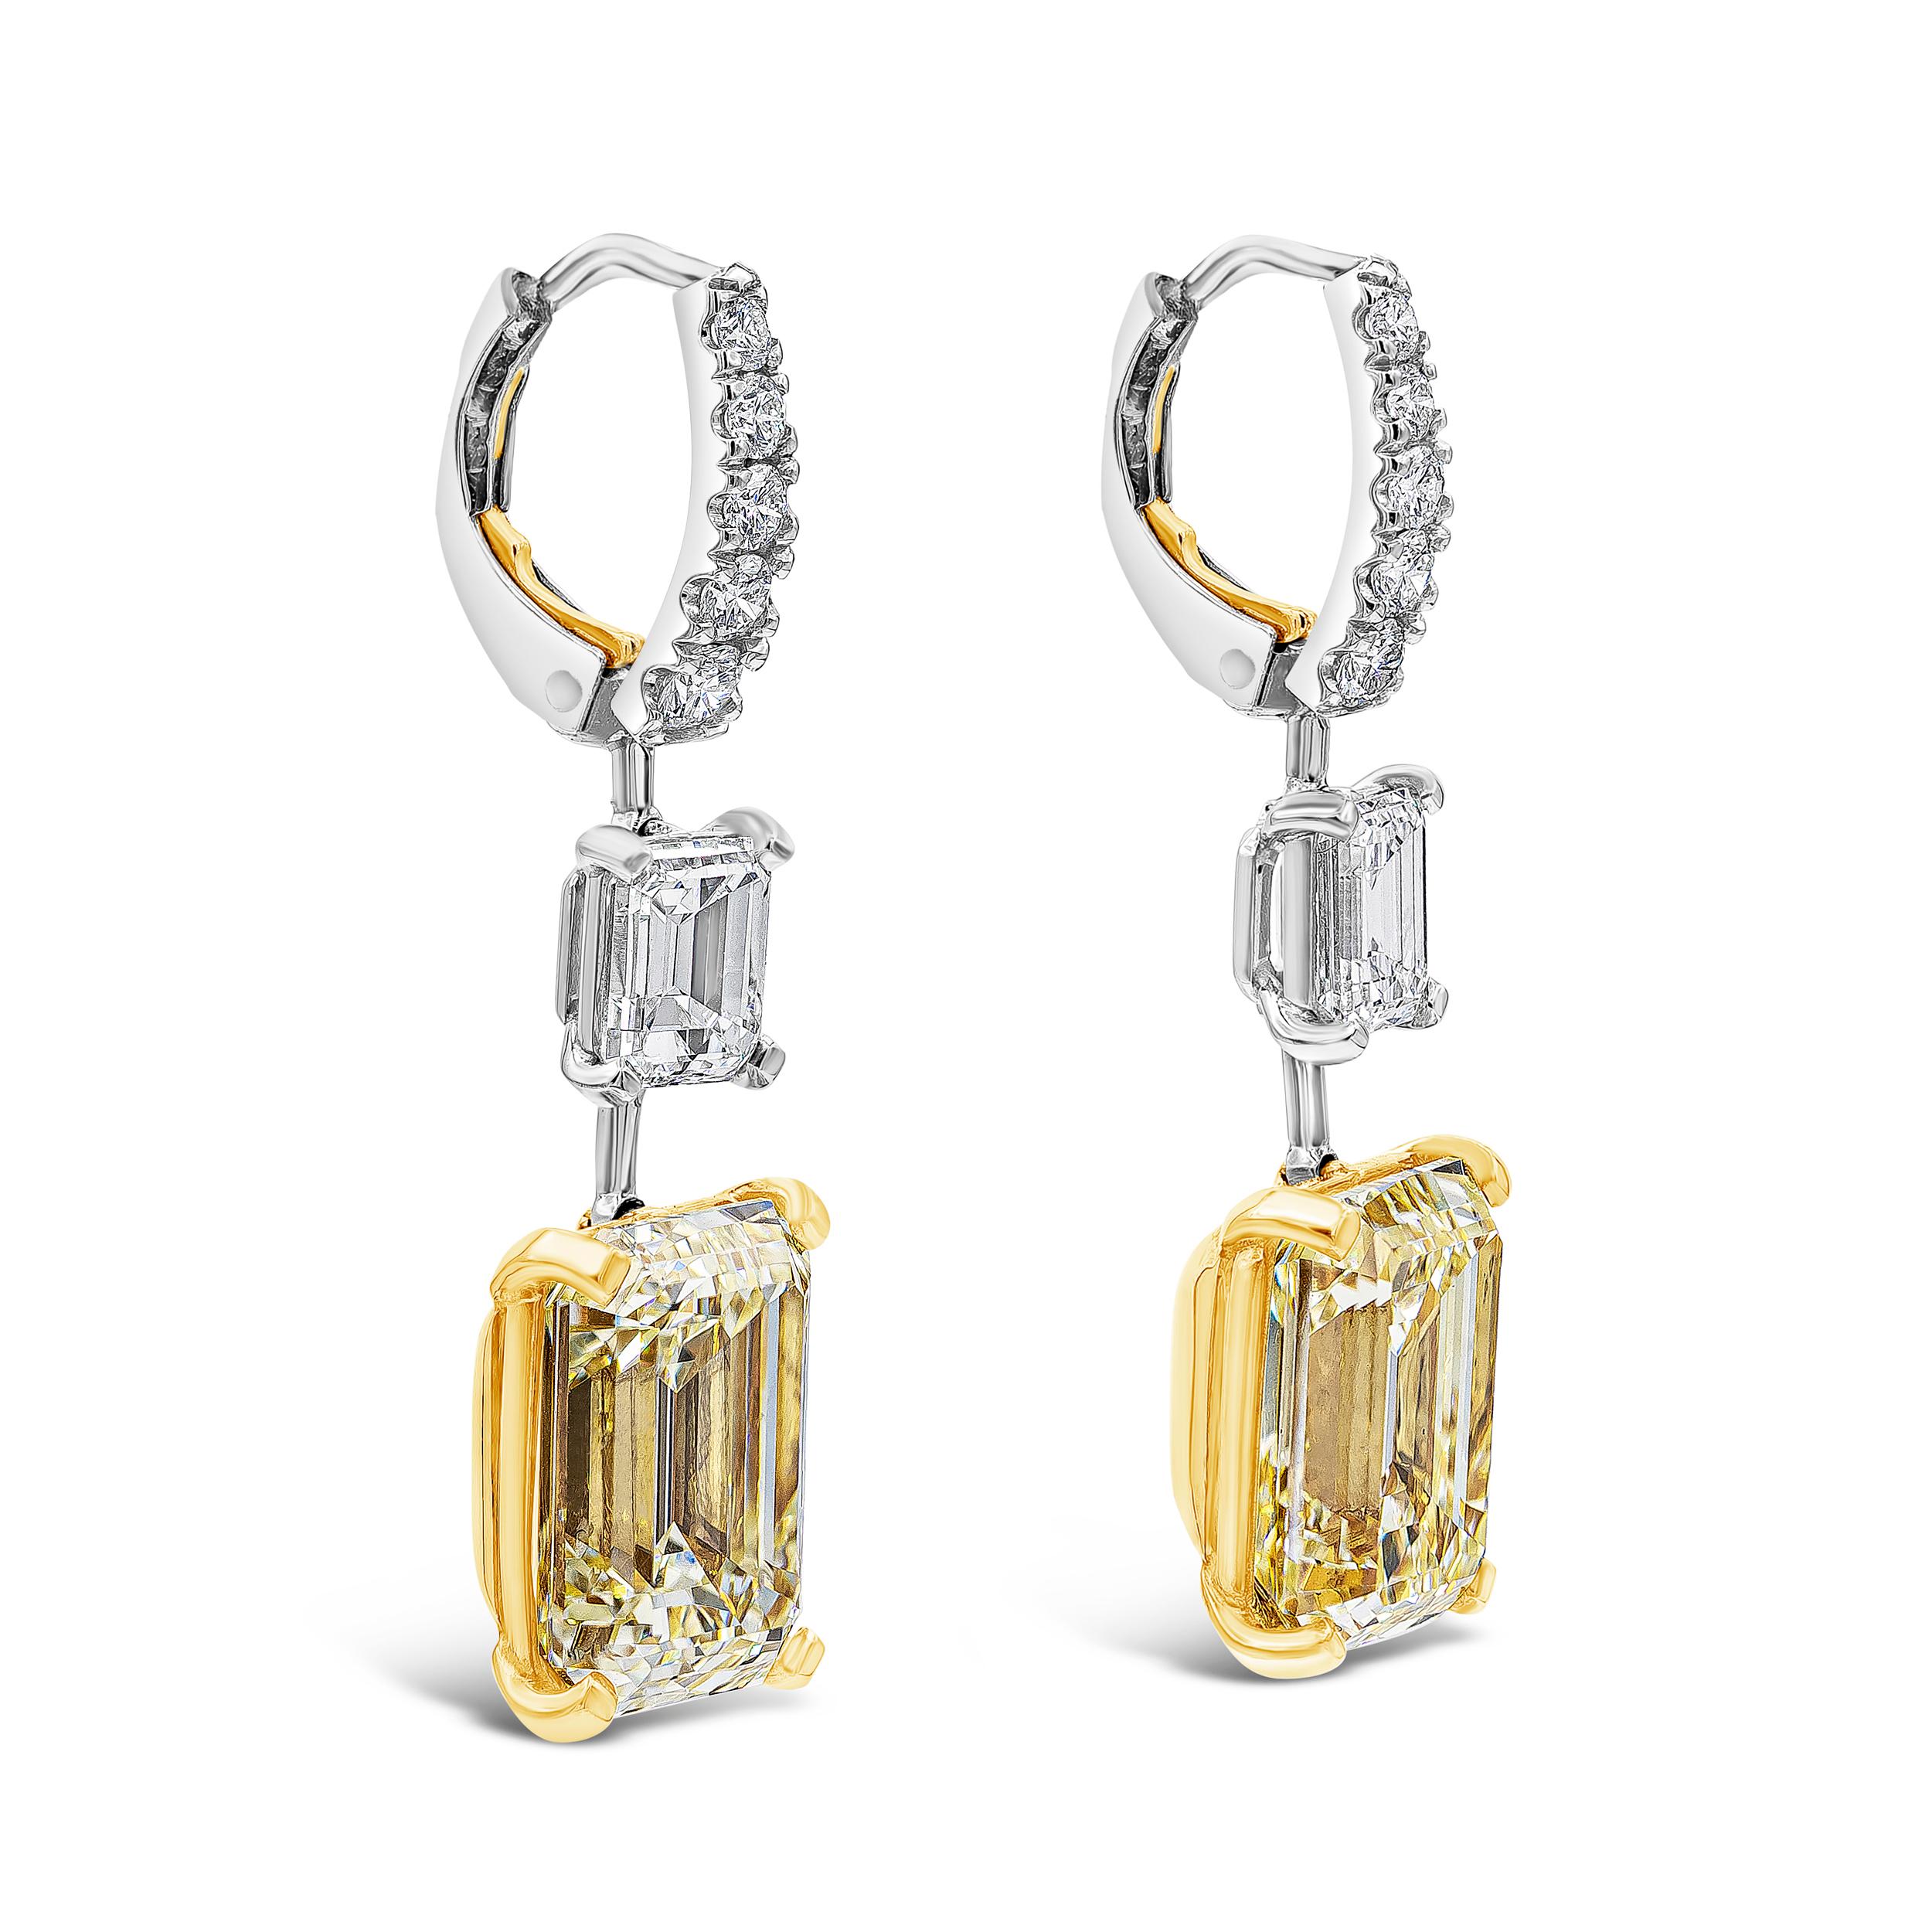 Well crafted and vibrant pair of dangle earrings featuring GIA certified yellow and white emerald cut diamonds set on a four prong 18k rose gold and platinum basket respectively. Suspended on a cluster of white diamonds, 10 pieces in total, weighing